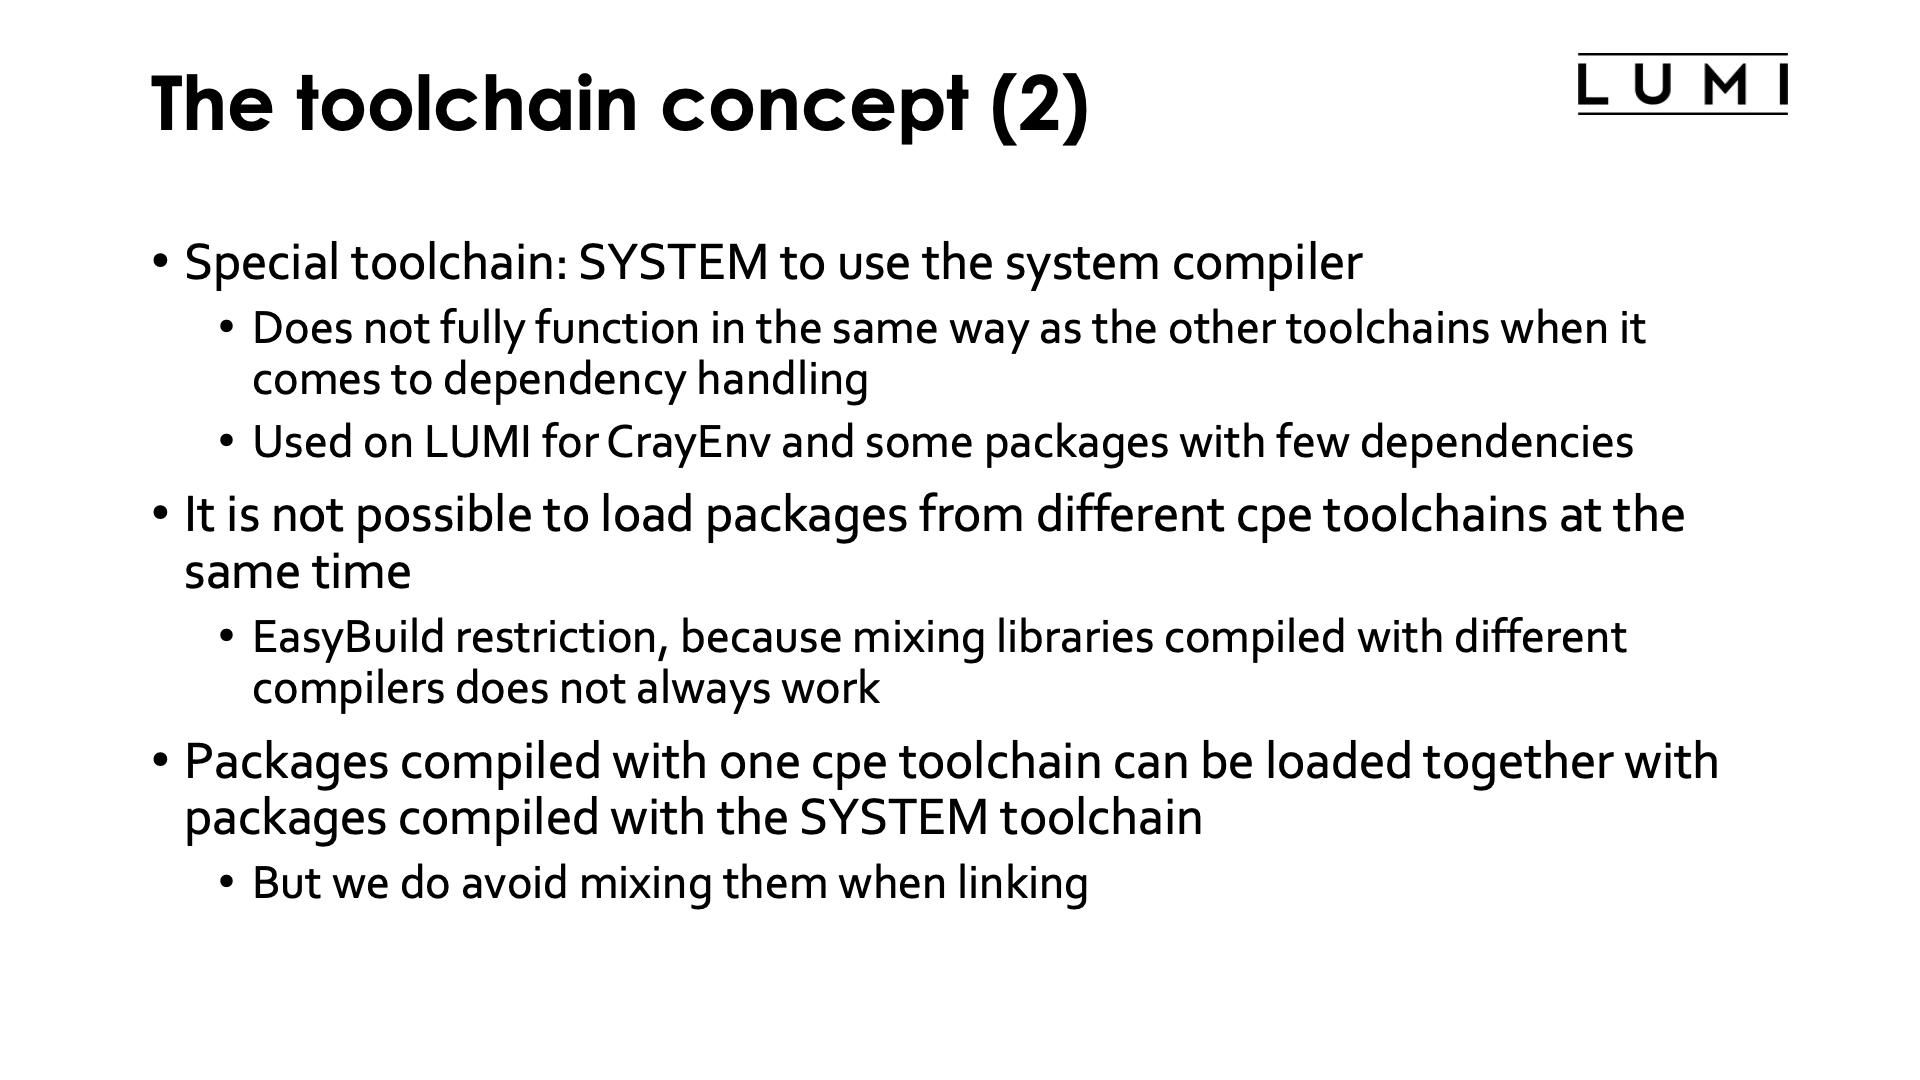 The toolchain concept 2